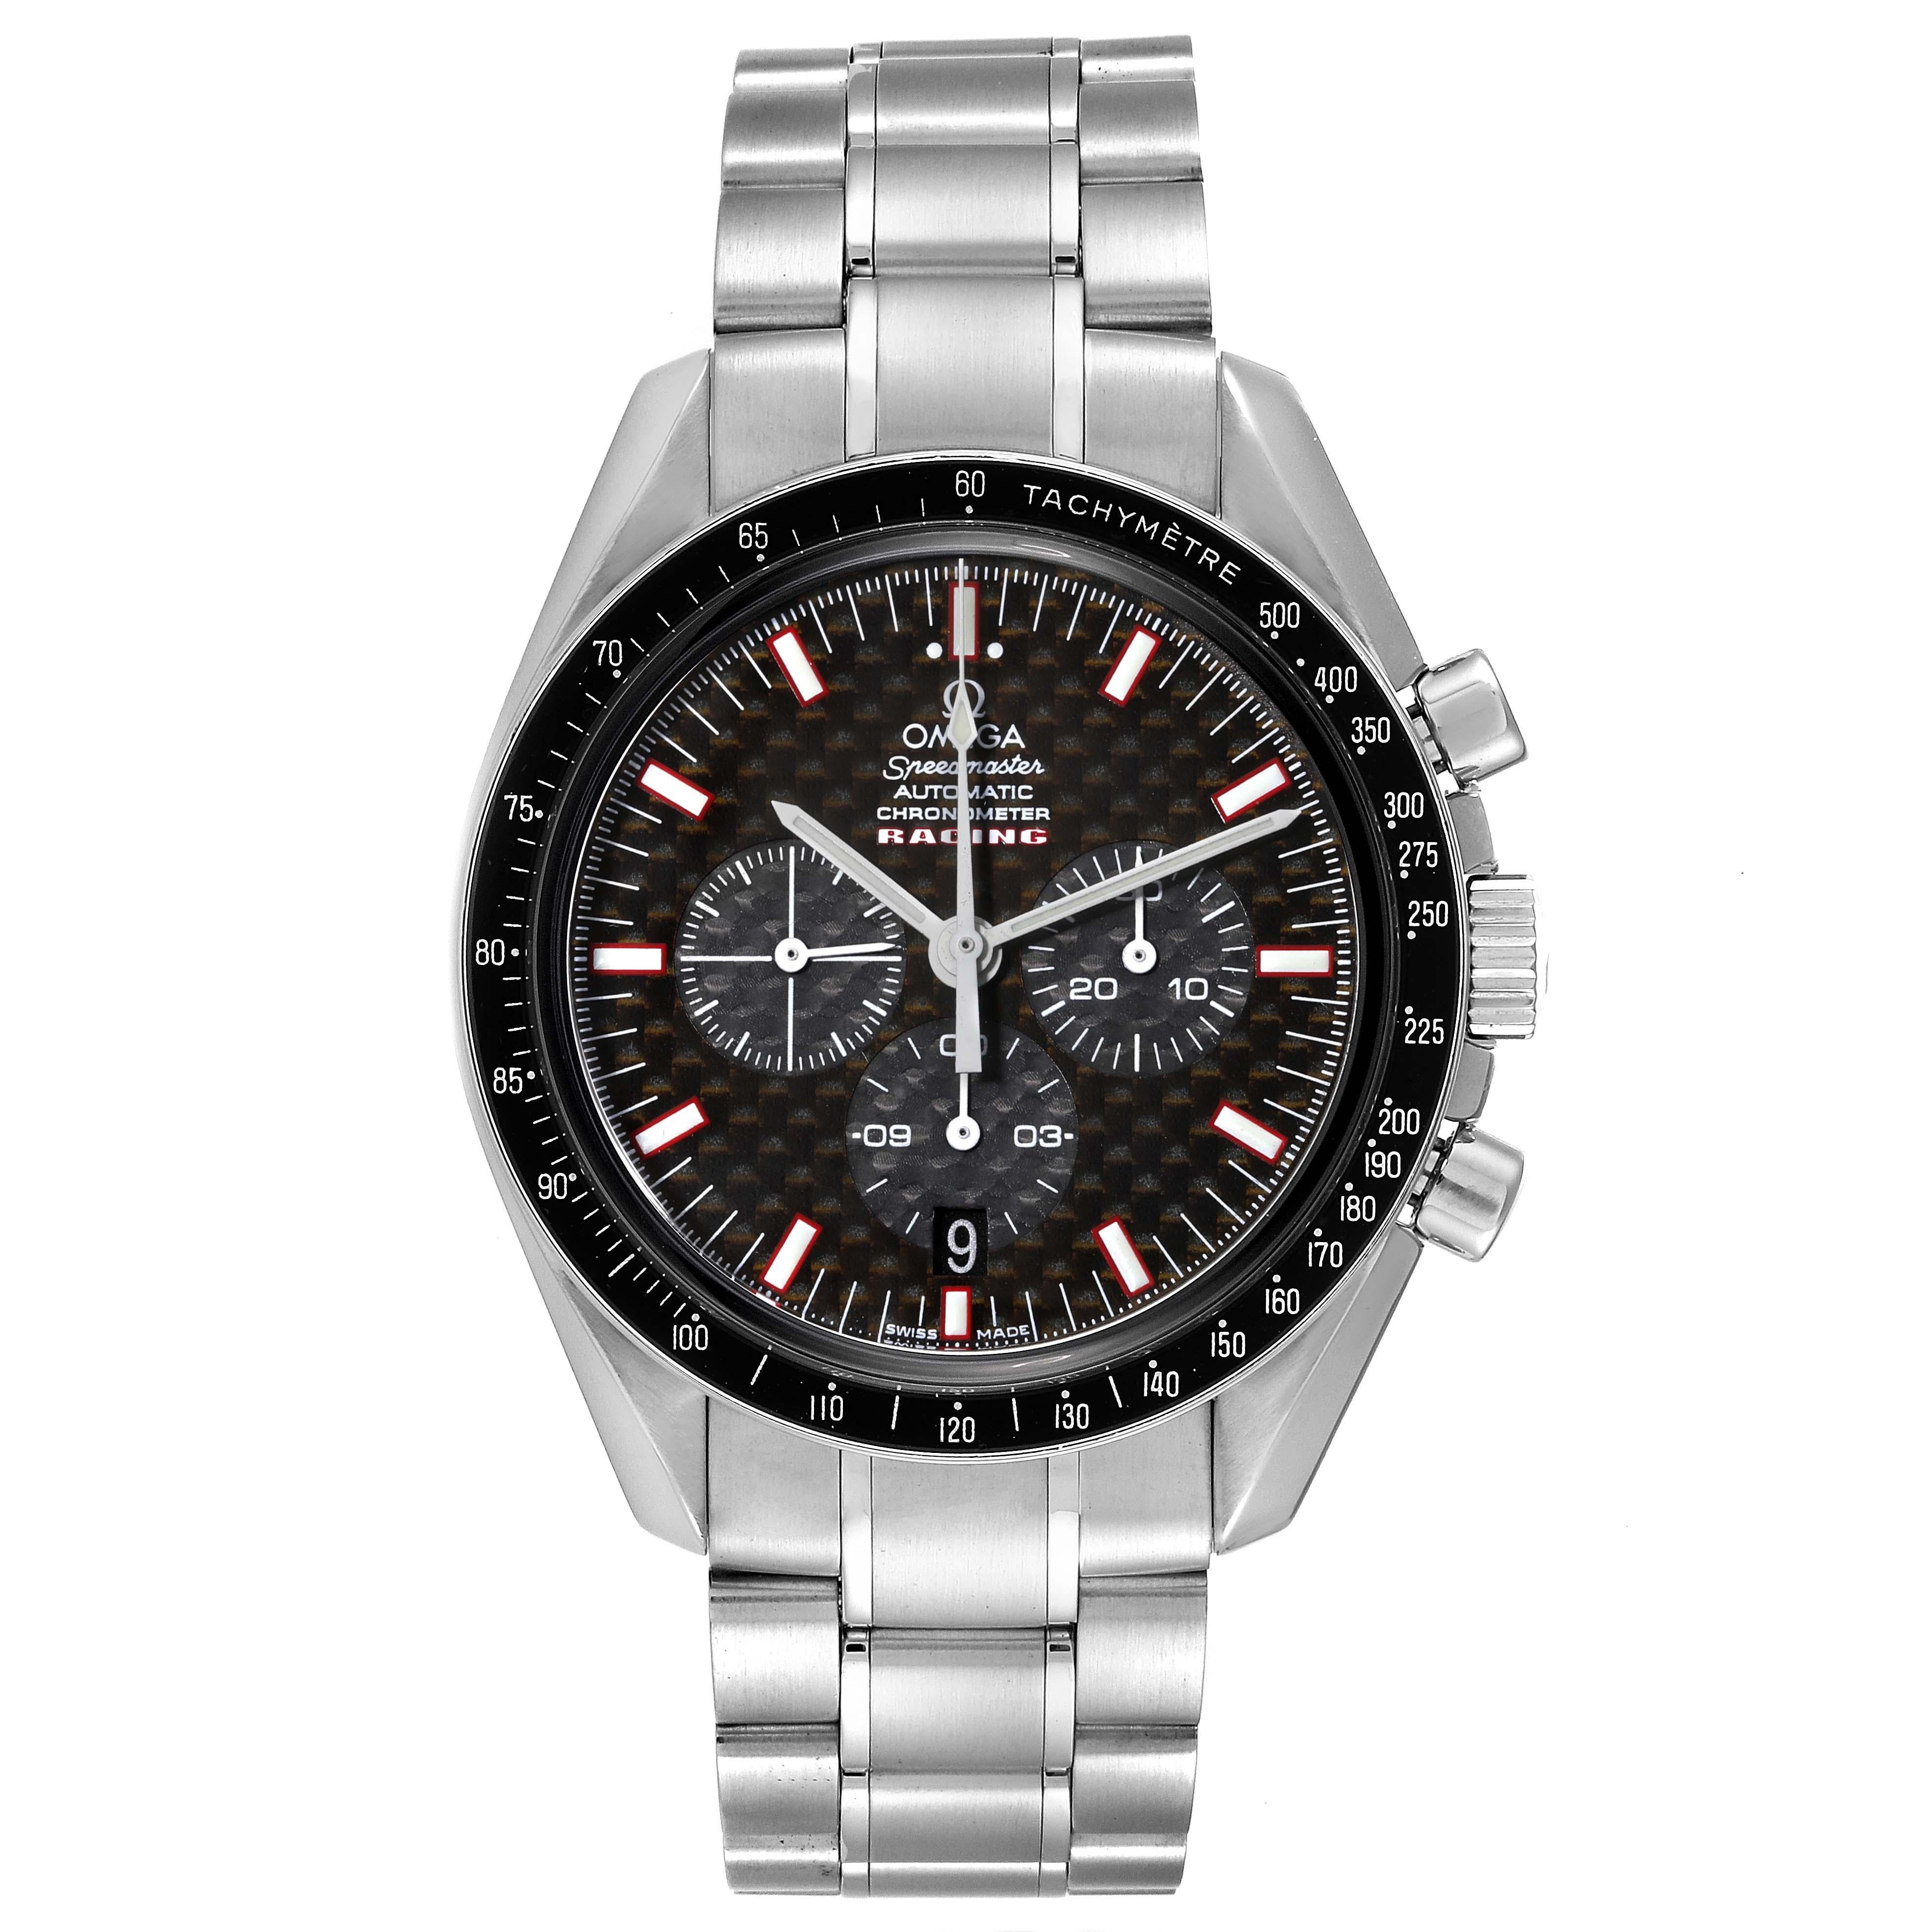 Omega Speedmaster Professional Racing Steel Mens Watch 3552.59.00 Card. Automatic self-winding chronograph movement. Stainless steel round case 42.0 mm in diameter. Black bezel with tachymeter function. Scratch resistant sapphire crystal crystal.